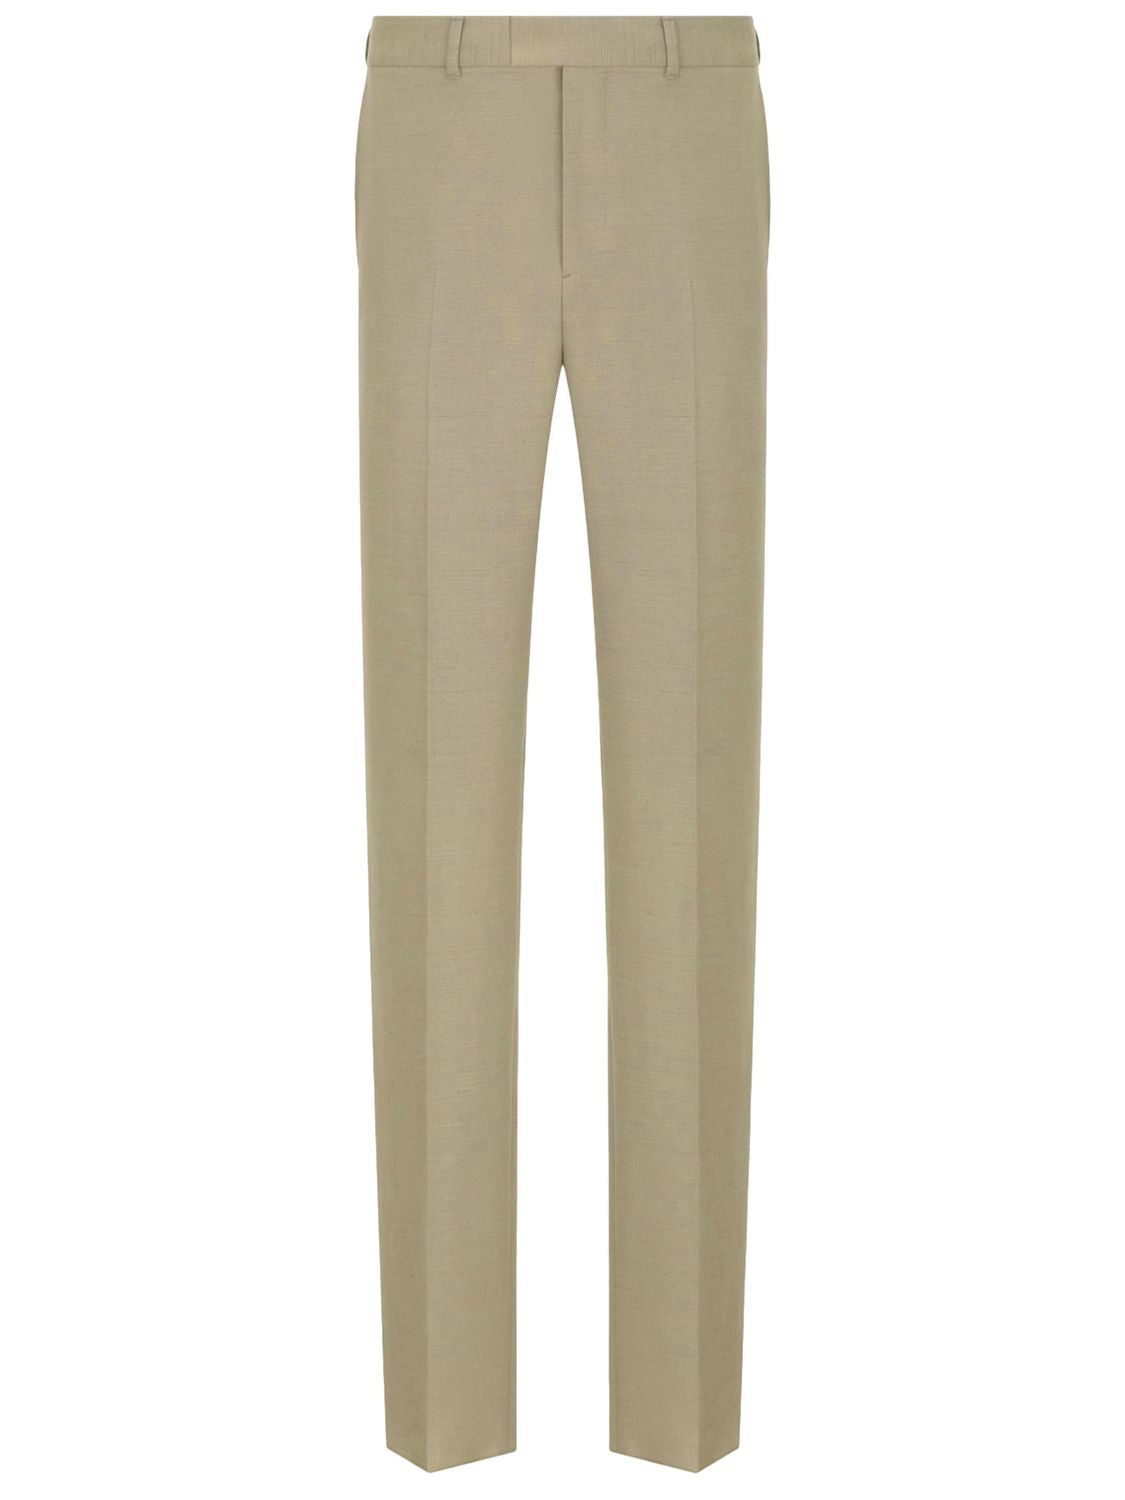 Dior Tailored Chino Trousers In Beige Virgin Wool And Linen For Men